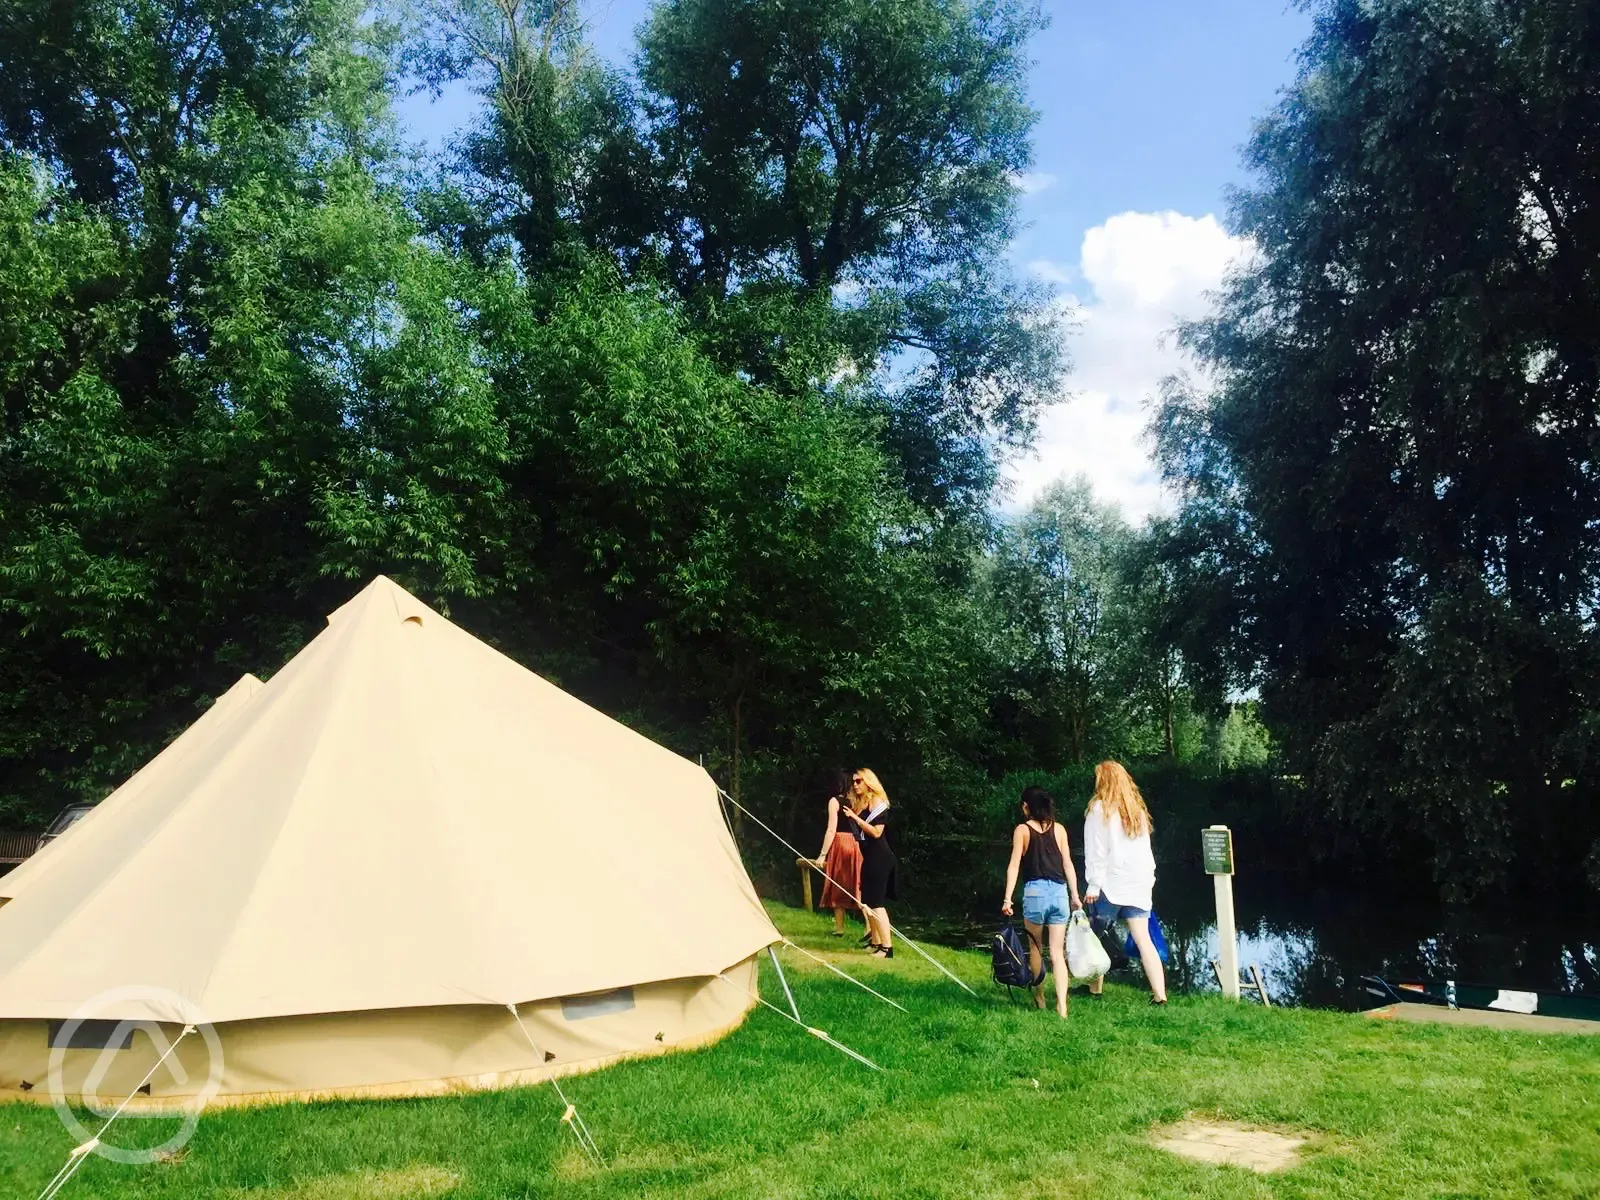 Invite family and friends to camp by the river overnight